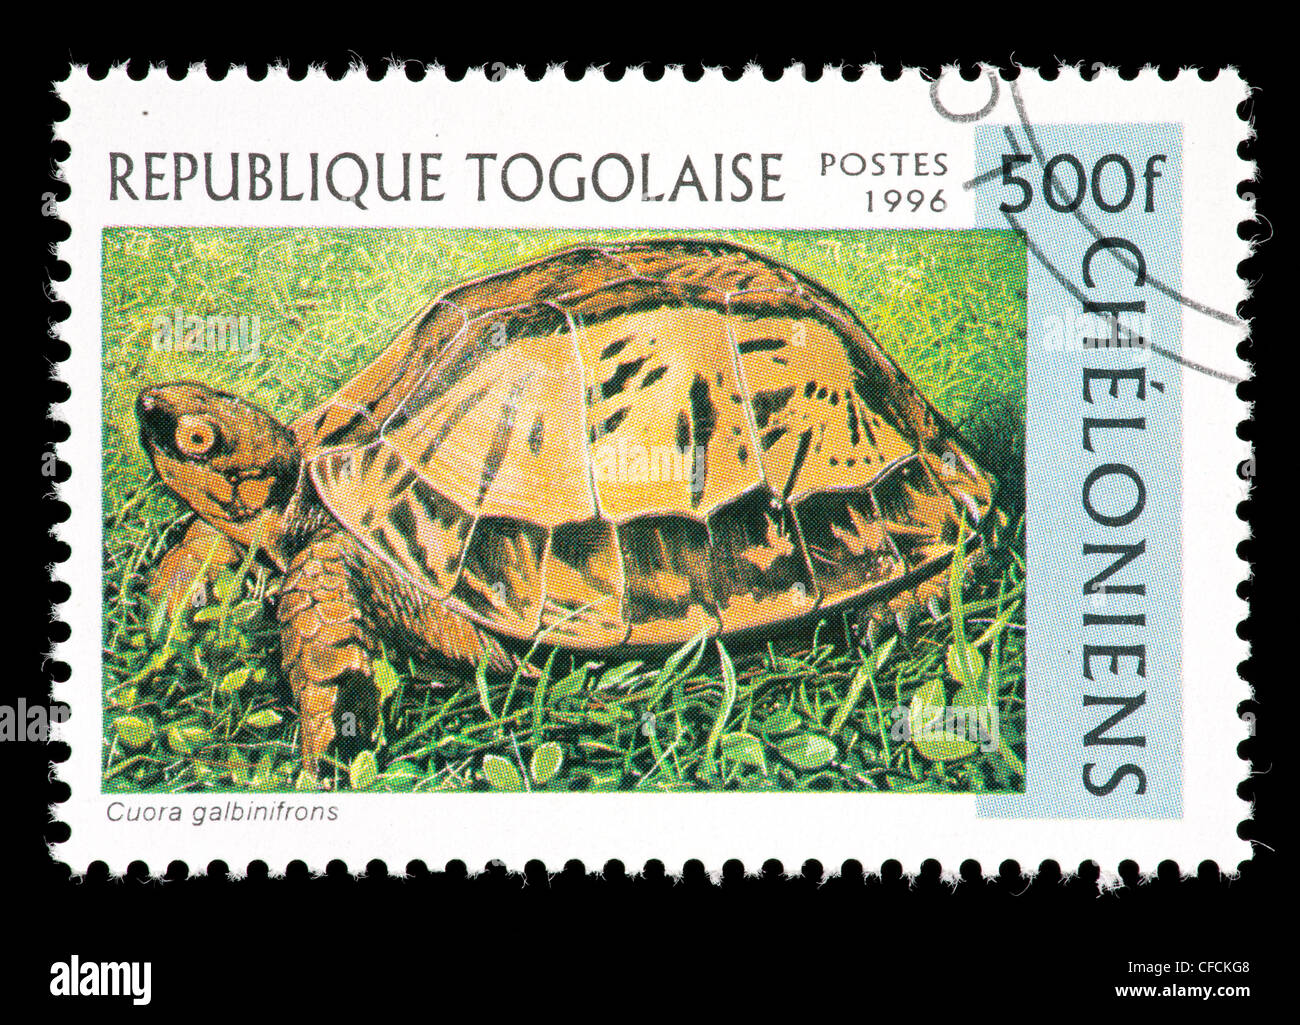 Postage stamp from Togo depicting Indochinese box turtle (Cuora galbinifrons) Stock Photo